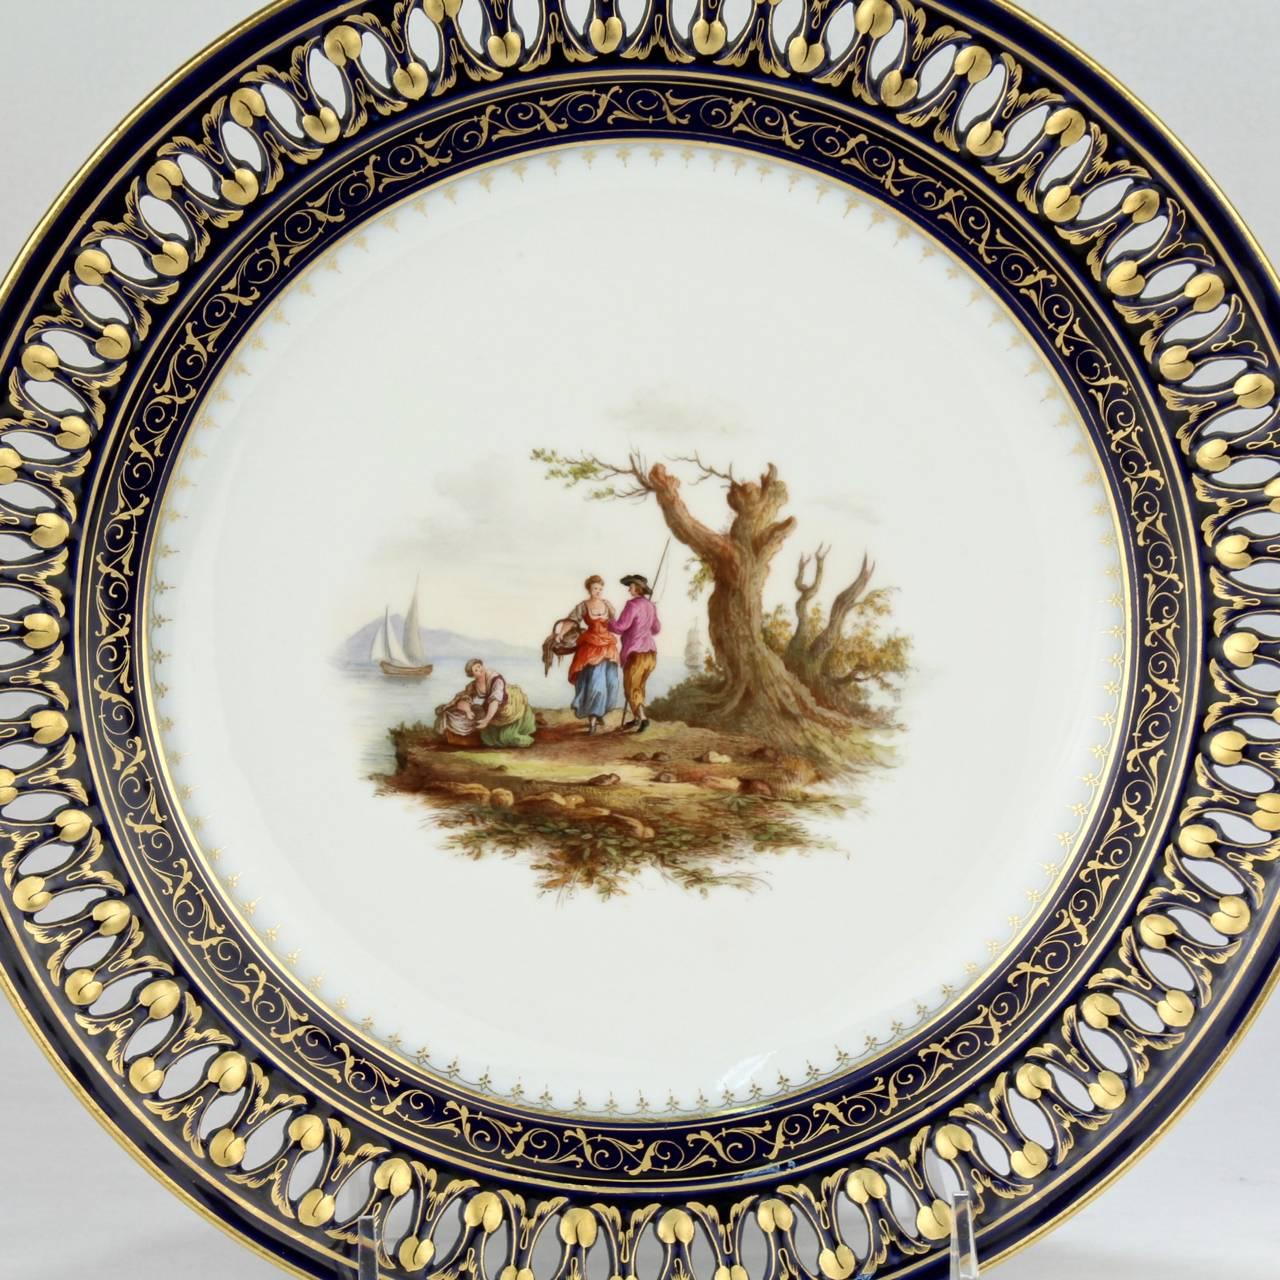 German Pair of Antique Meissen Porcelain Reticulated Cabinet Plates with Cobalt Borders